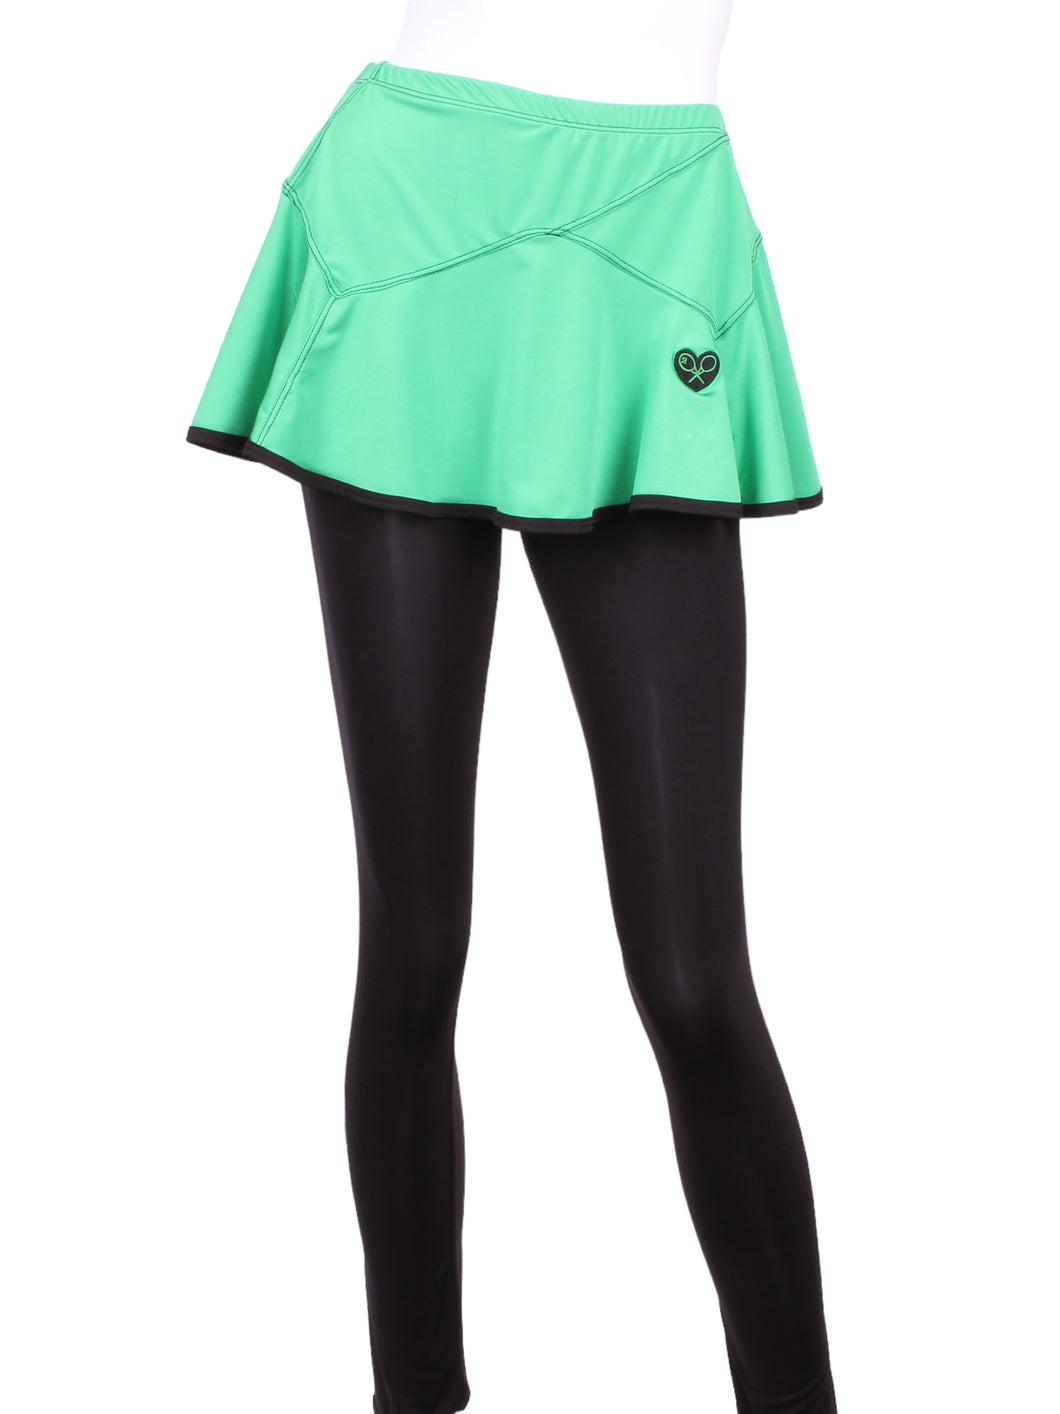 This is our limited edition Triangle Green Skirt with Black Leggings.  This piece has a silky soft and quick-drying and binding to match.  We make these in very small quantities - by design.  Unique.  Luxurious.  Comfortable.  Cool.  Fun.